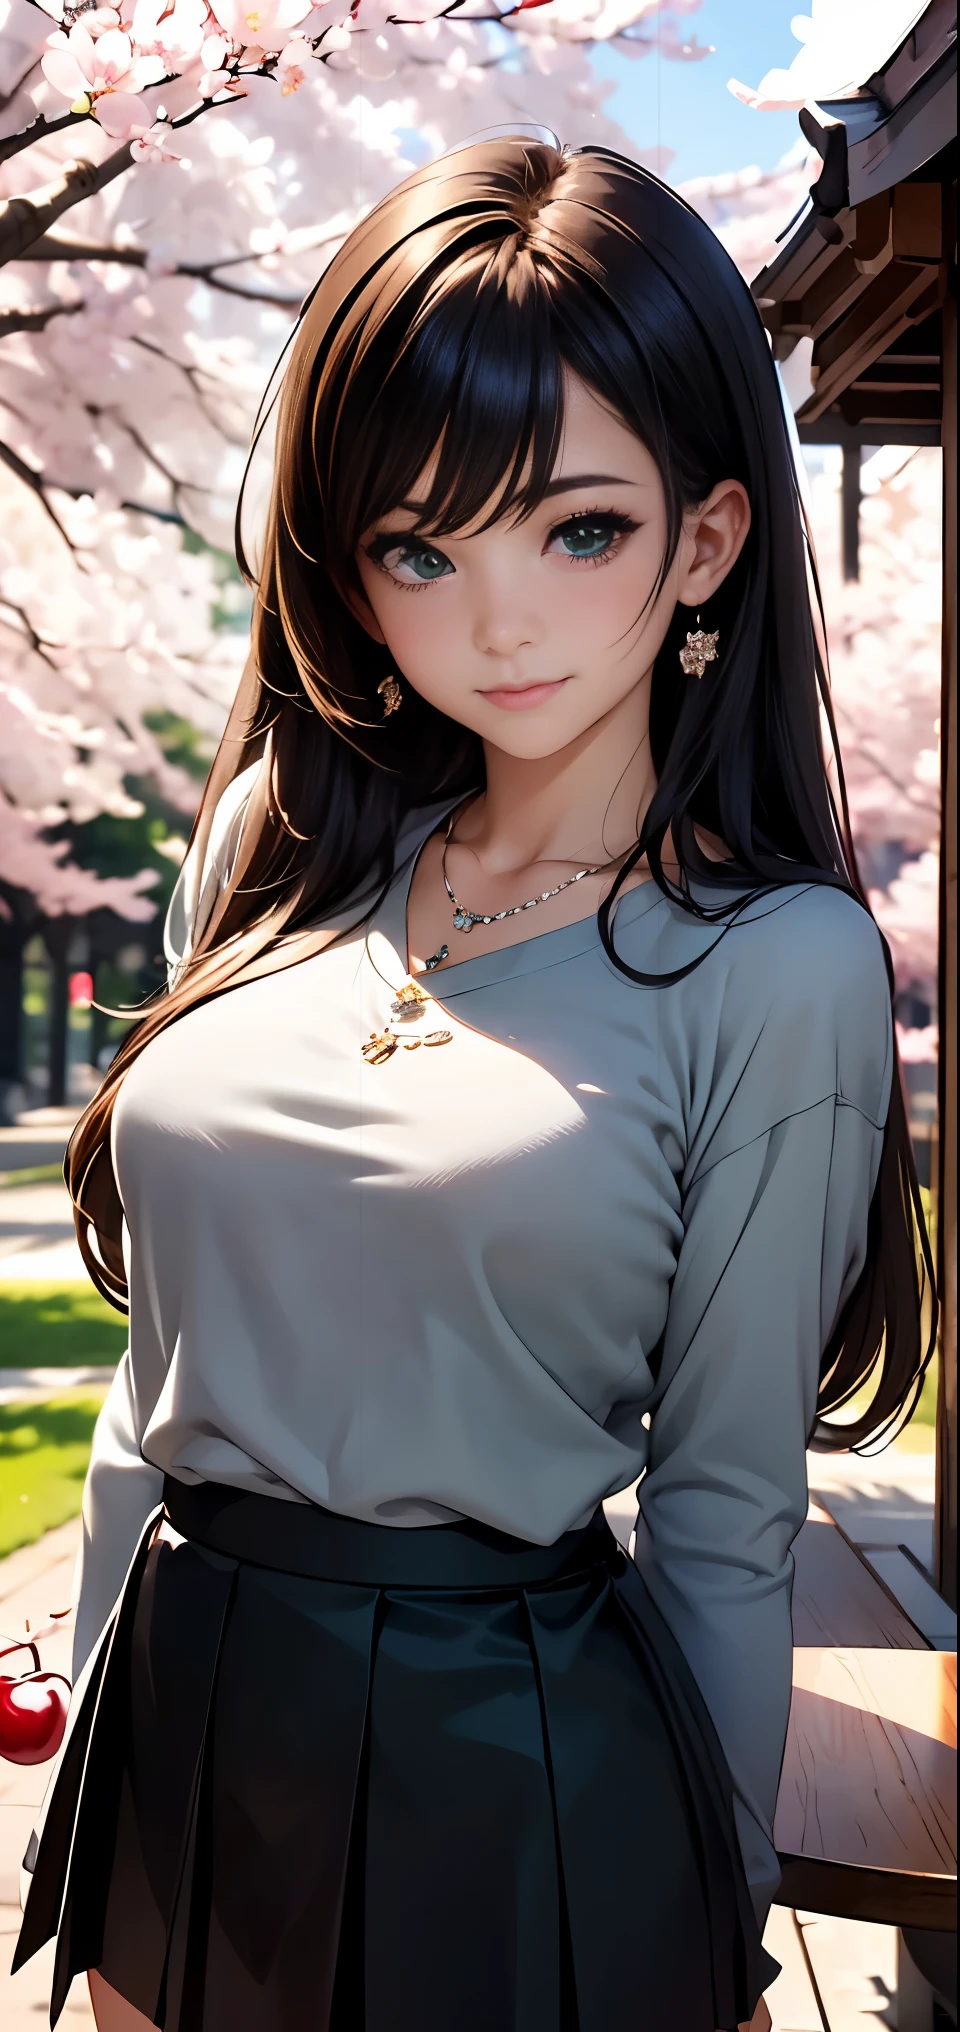 ((table top, highest quality, High resolution, nffsw, perfect pixel, Depth of written boundary, 4k, nffsw, nffsw))), 1 girl, single, alone, beautiful anime girl, beautiful art style, anime character, ((long hair, bangs, brown hair)), ((green eyes:1.4, round eyes, beautiful eyelashes, realistic eyes)), ((detailed face, blush:1.2)), ((smooth texture:0.75, realistic texture:0.65, realistic:1.1, Anime CG style)),  dynamic angle, ((black sweater, long sleeve, black skirt, plaid skirt, Snazzy, 1 diamond necklace)), smile,  amusement park, ((cherry blossoms, cherry blossomsの花が散る))